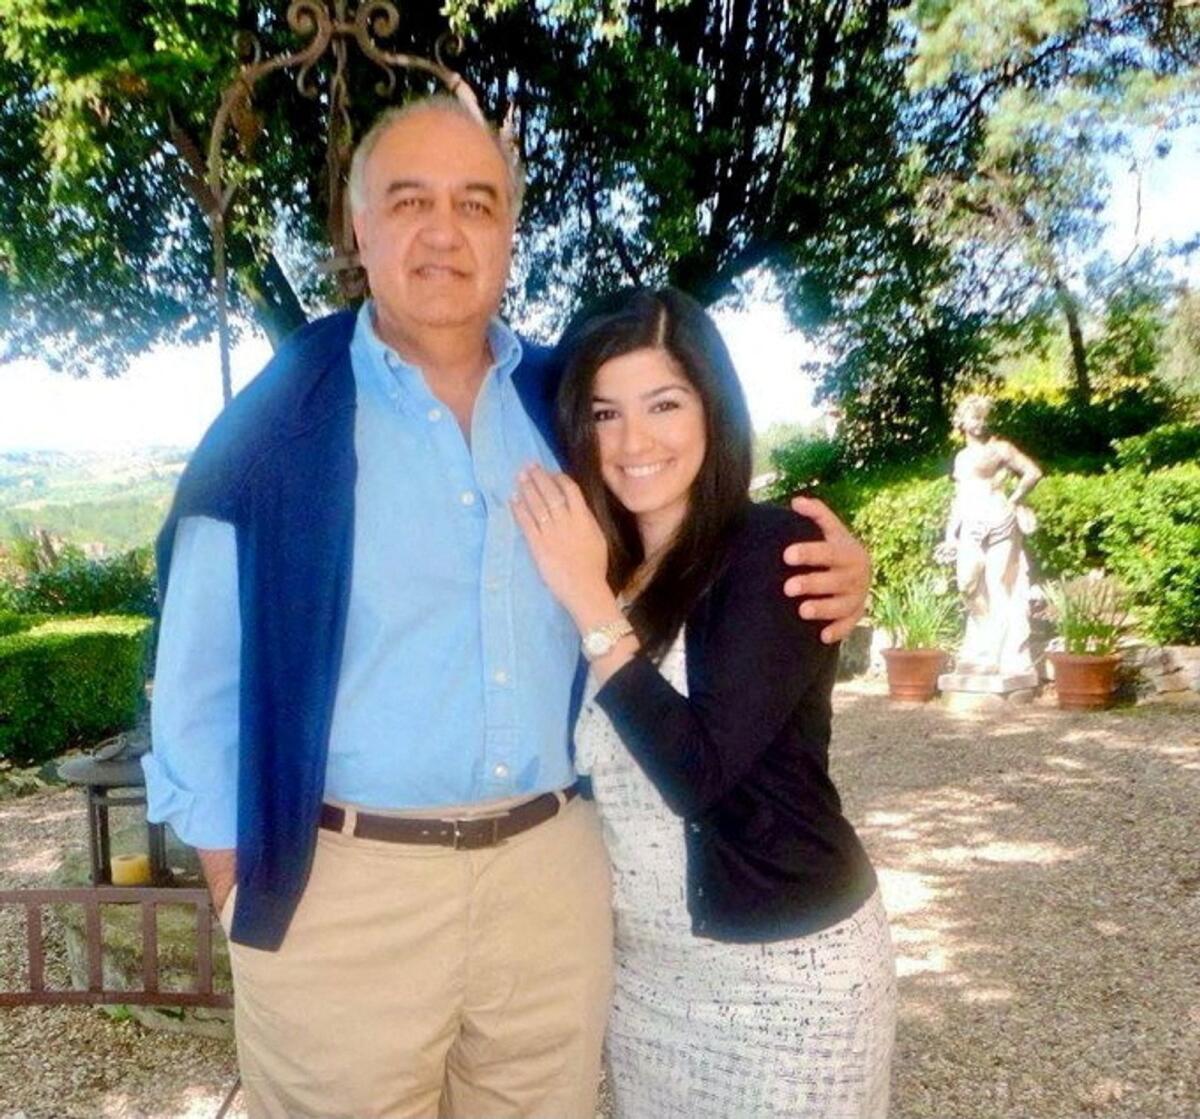 British-Iranian environmentalist Morad Tahbaz and his daughter Roxanne Tahbaz pose in this file picture obtained from social media. — Reuters file